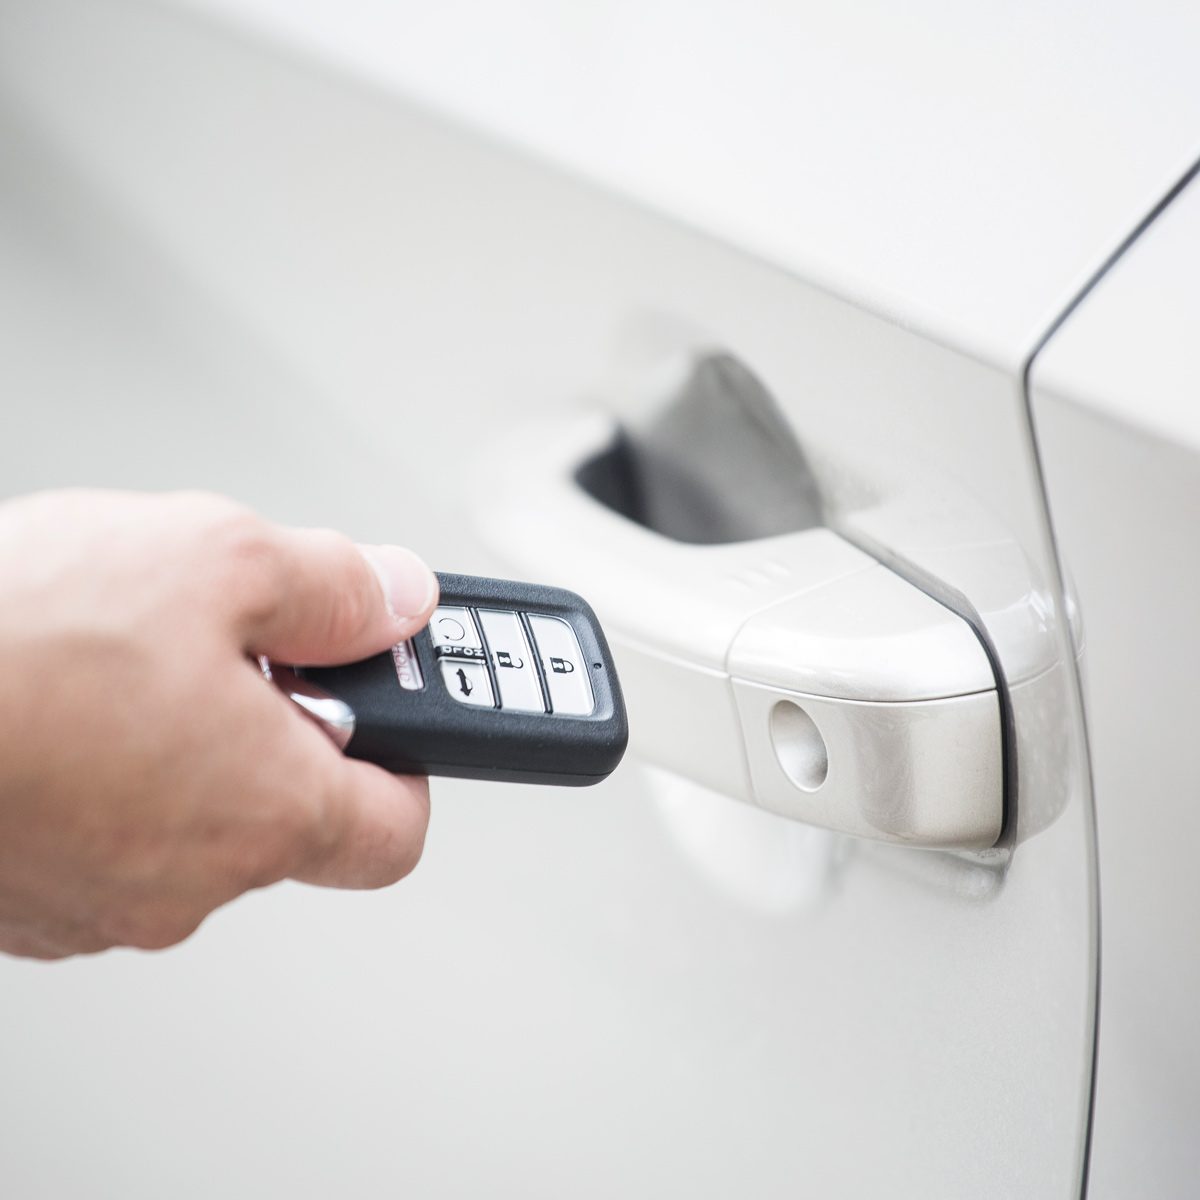 What to do if your car's key fob stops working